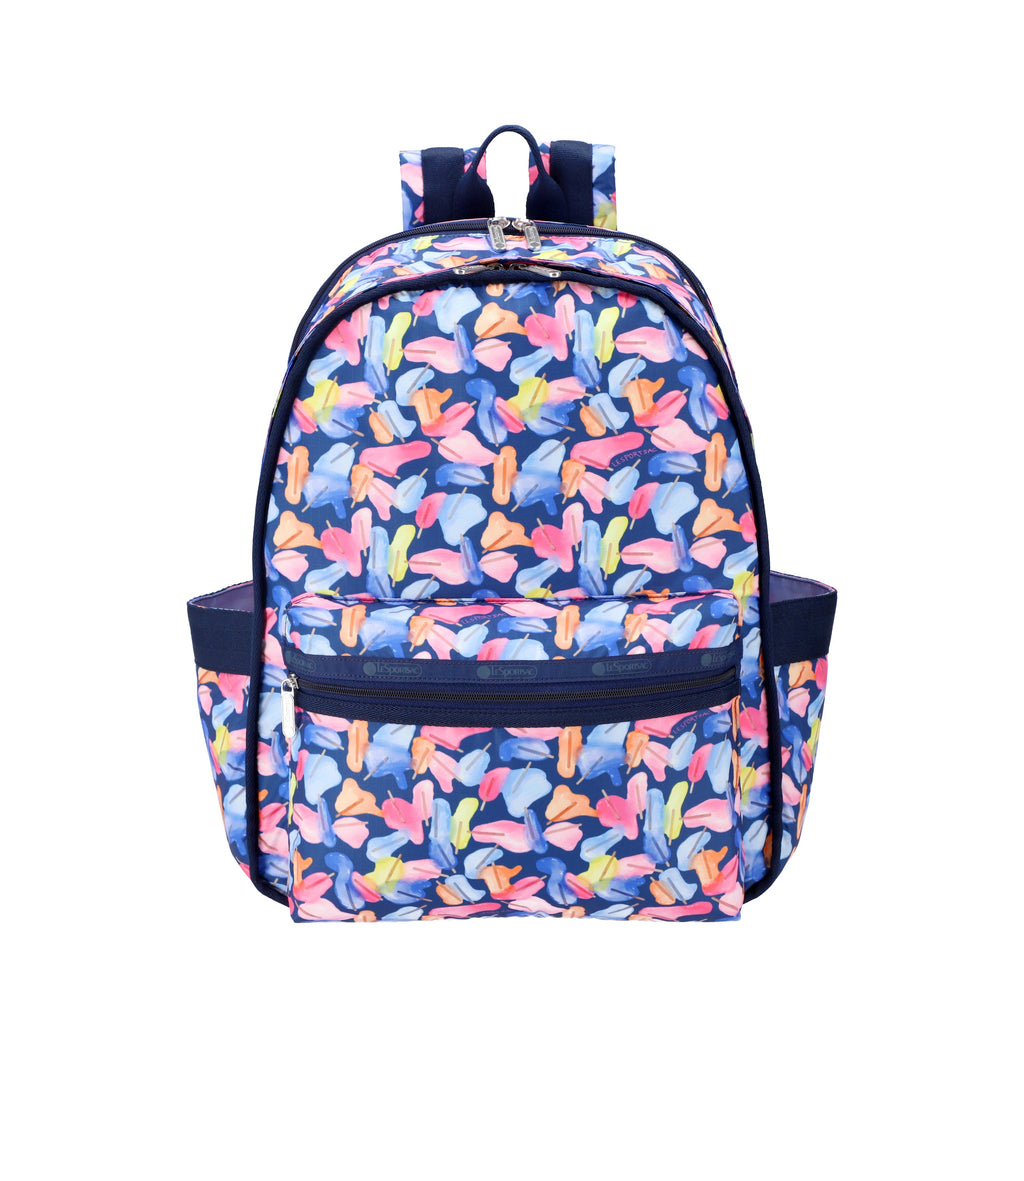 Route Backpack - 24256282329136